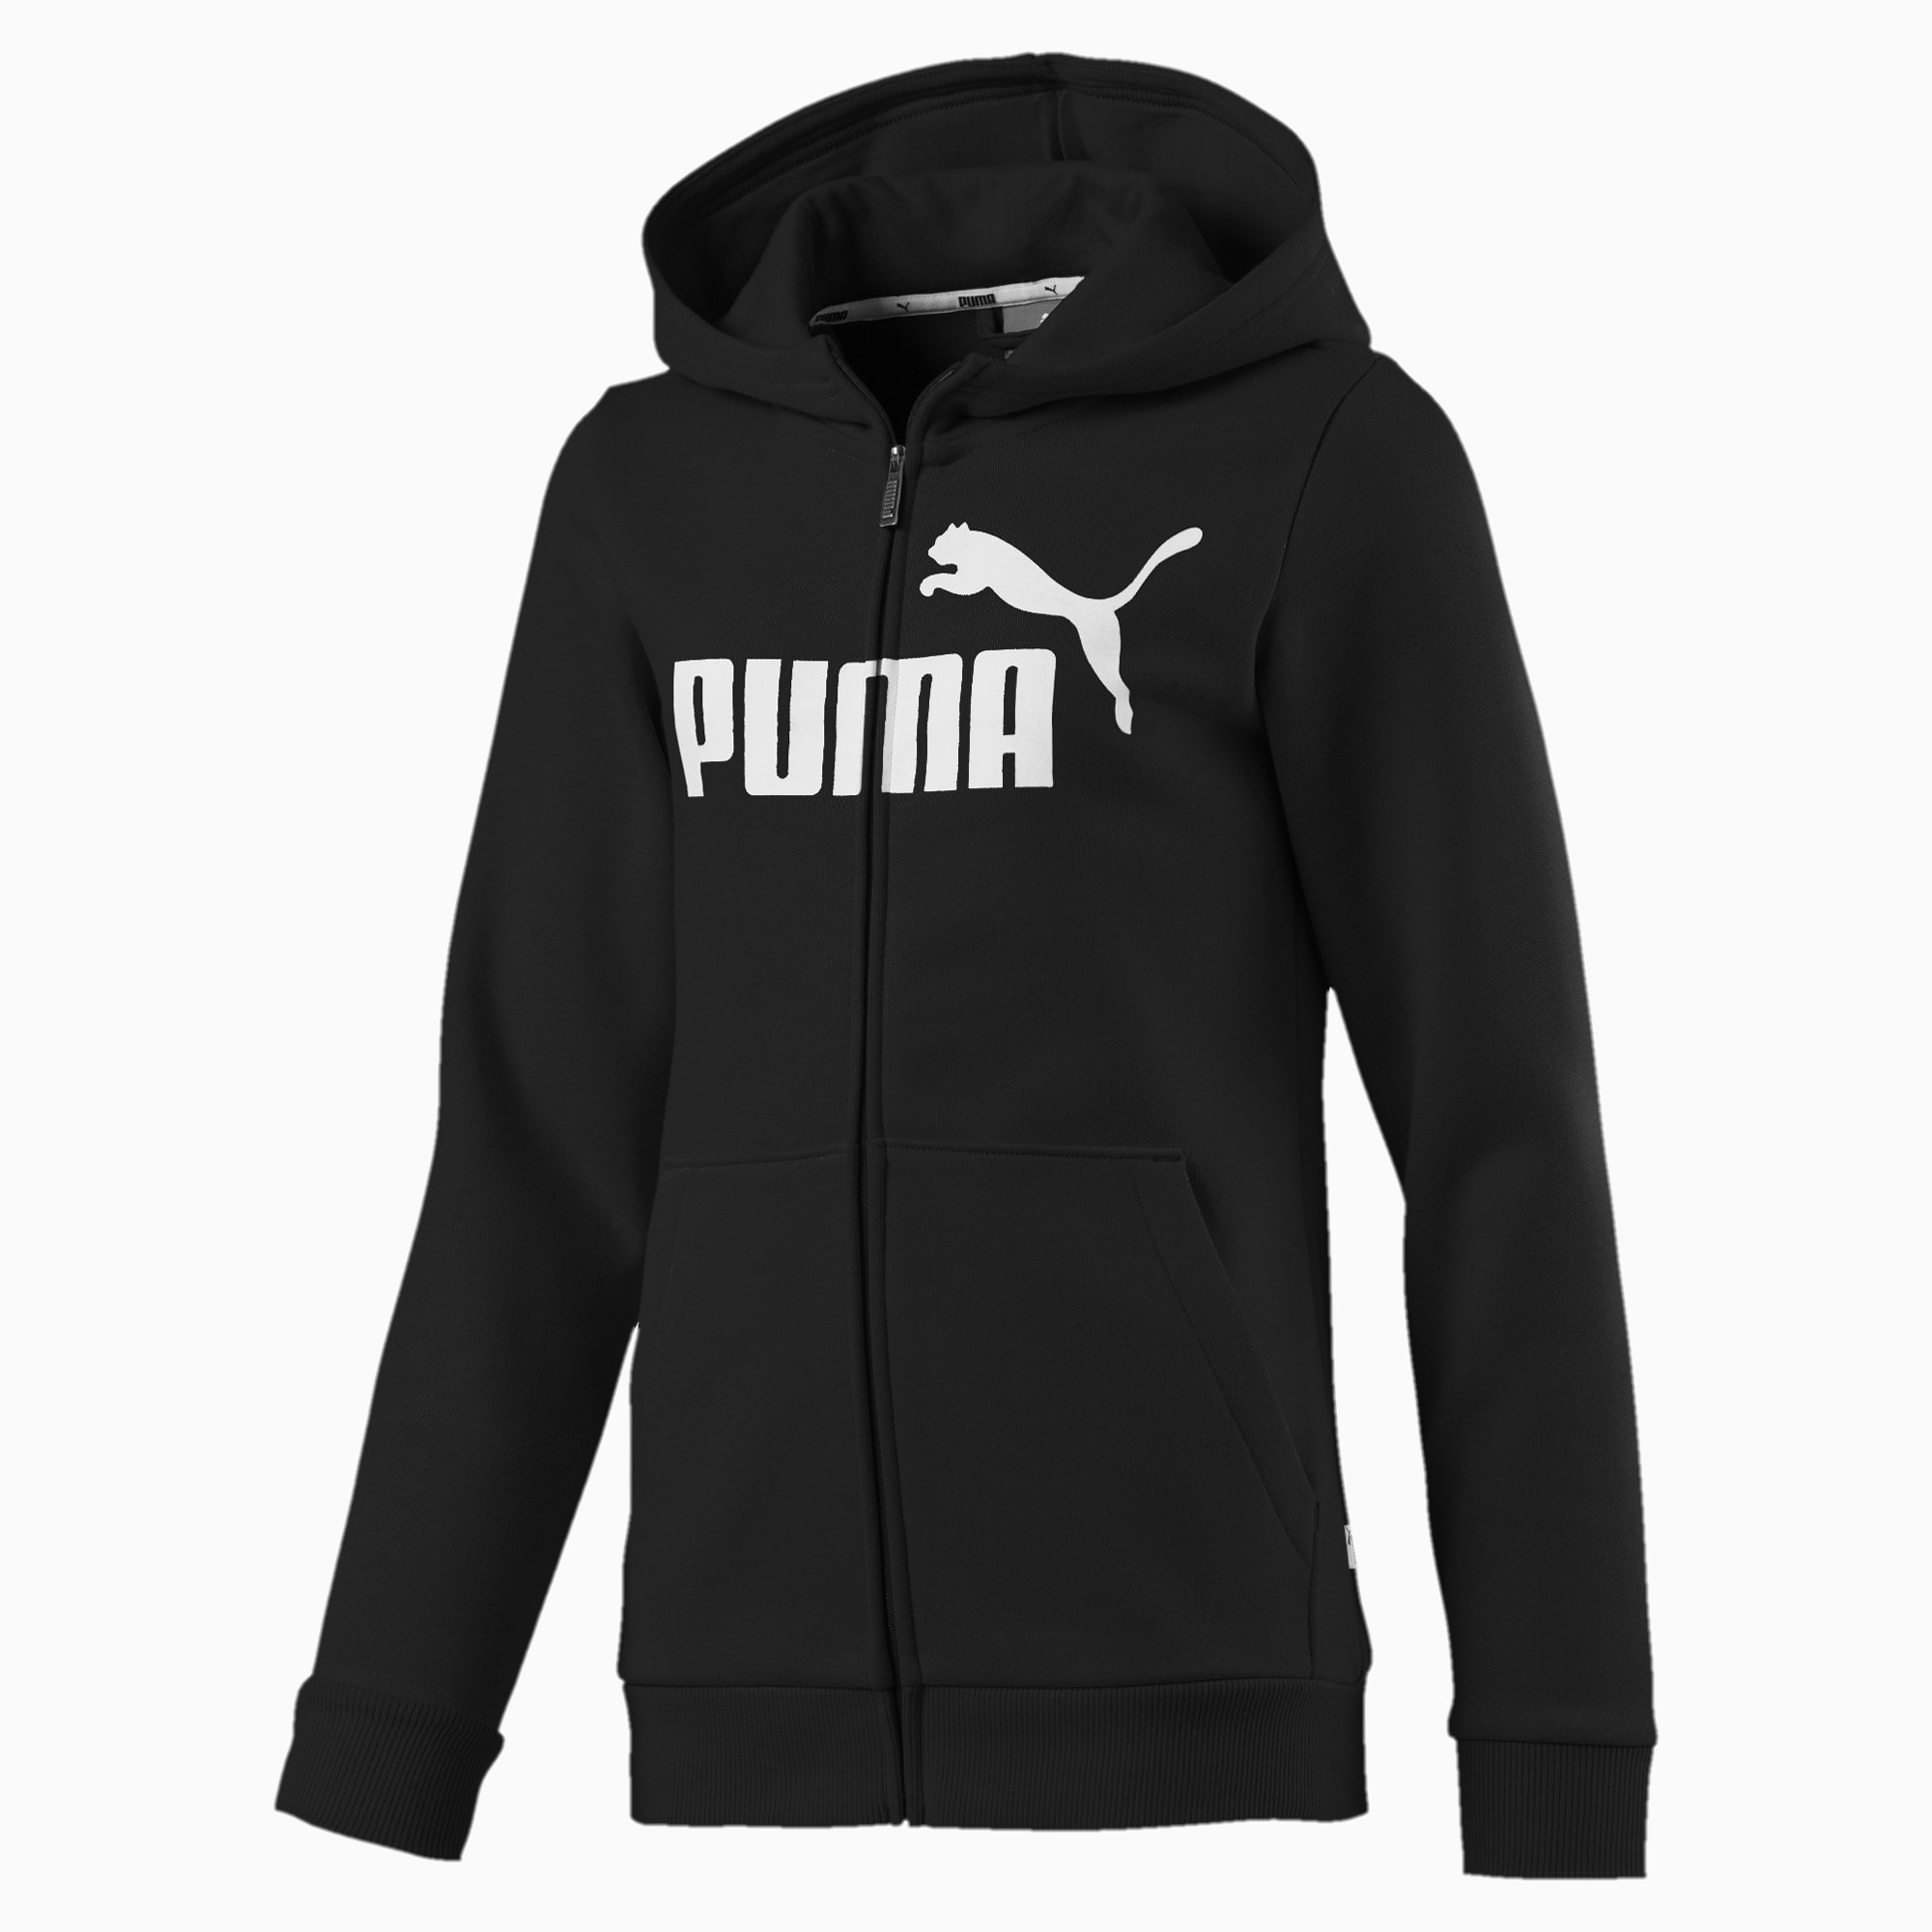 puma outfit girls